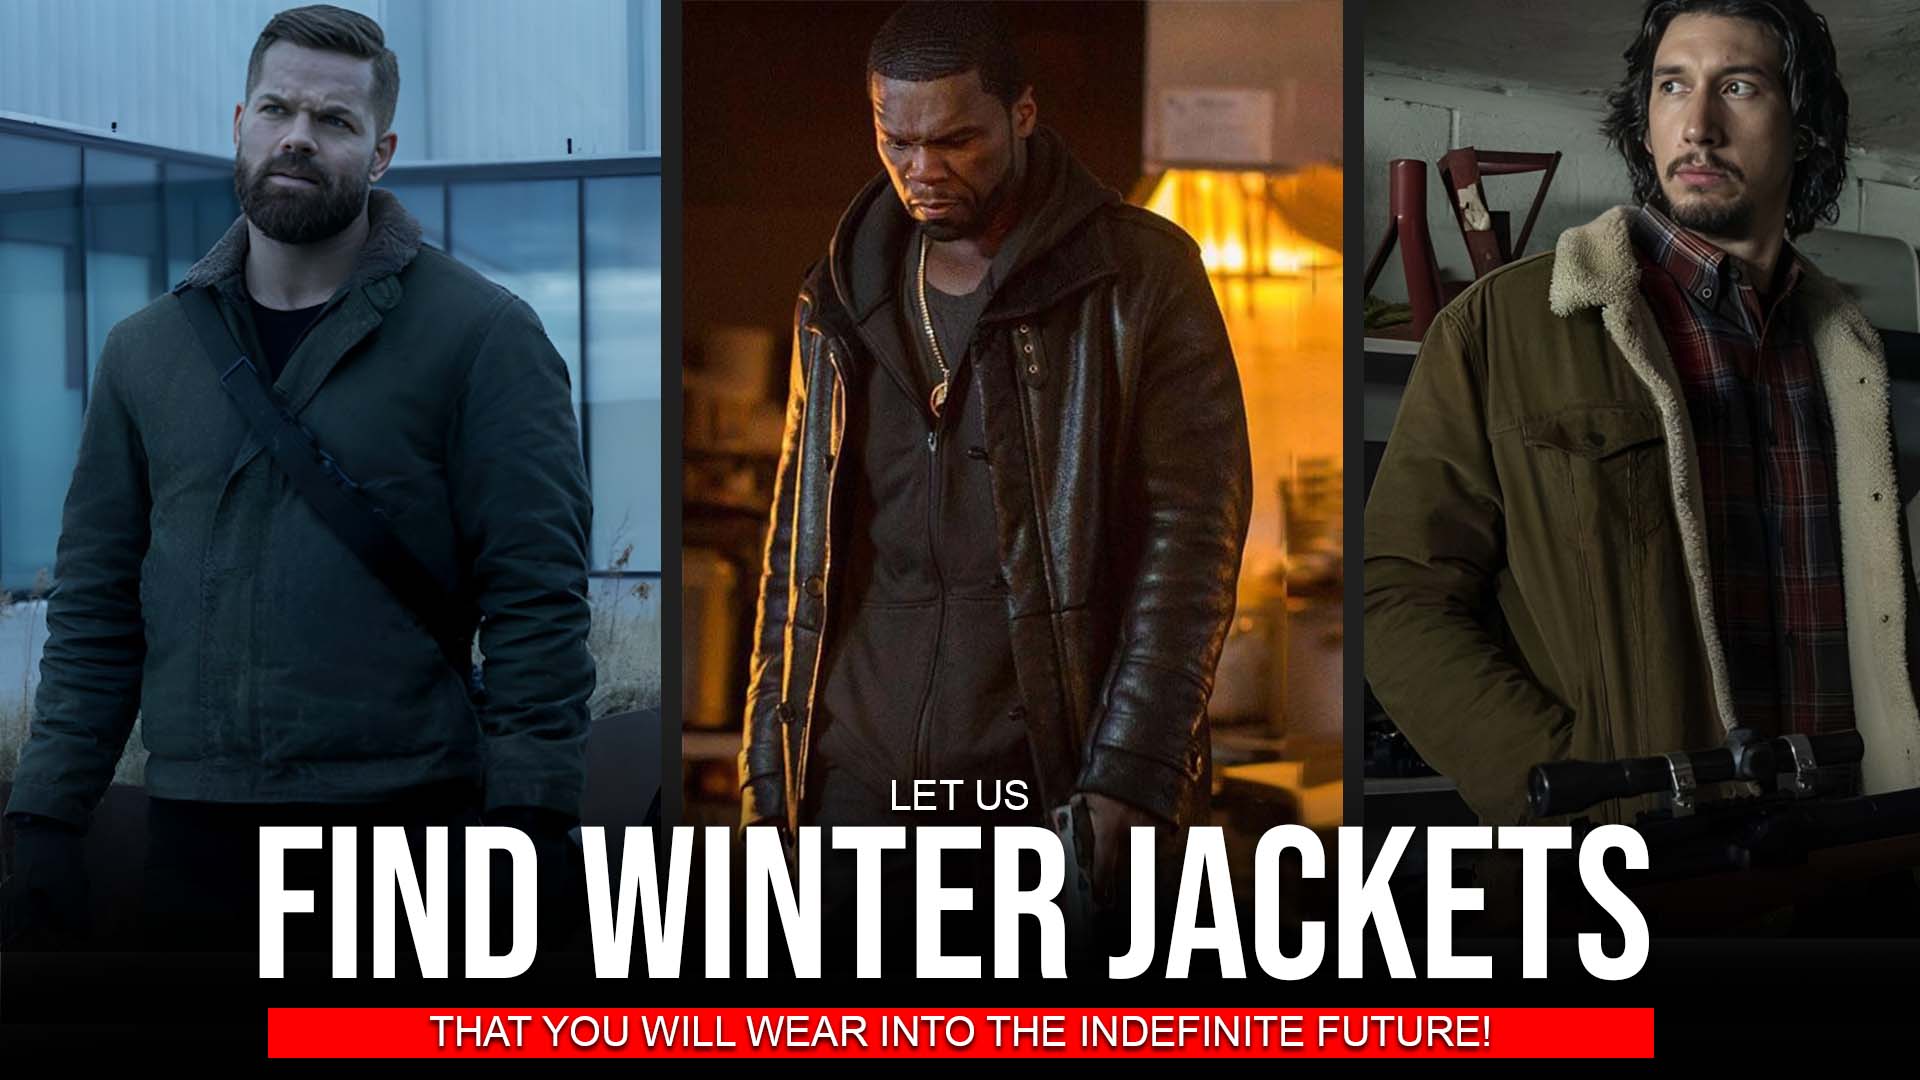 Let Us Find Winter Jackets That You Will Wear Into The Indefinite Future